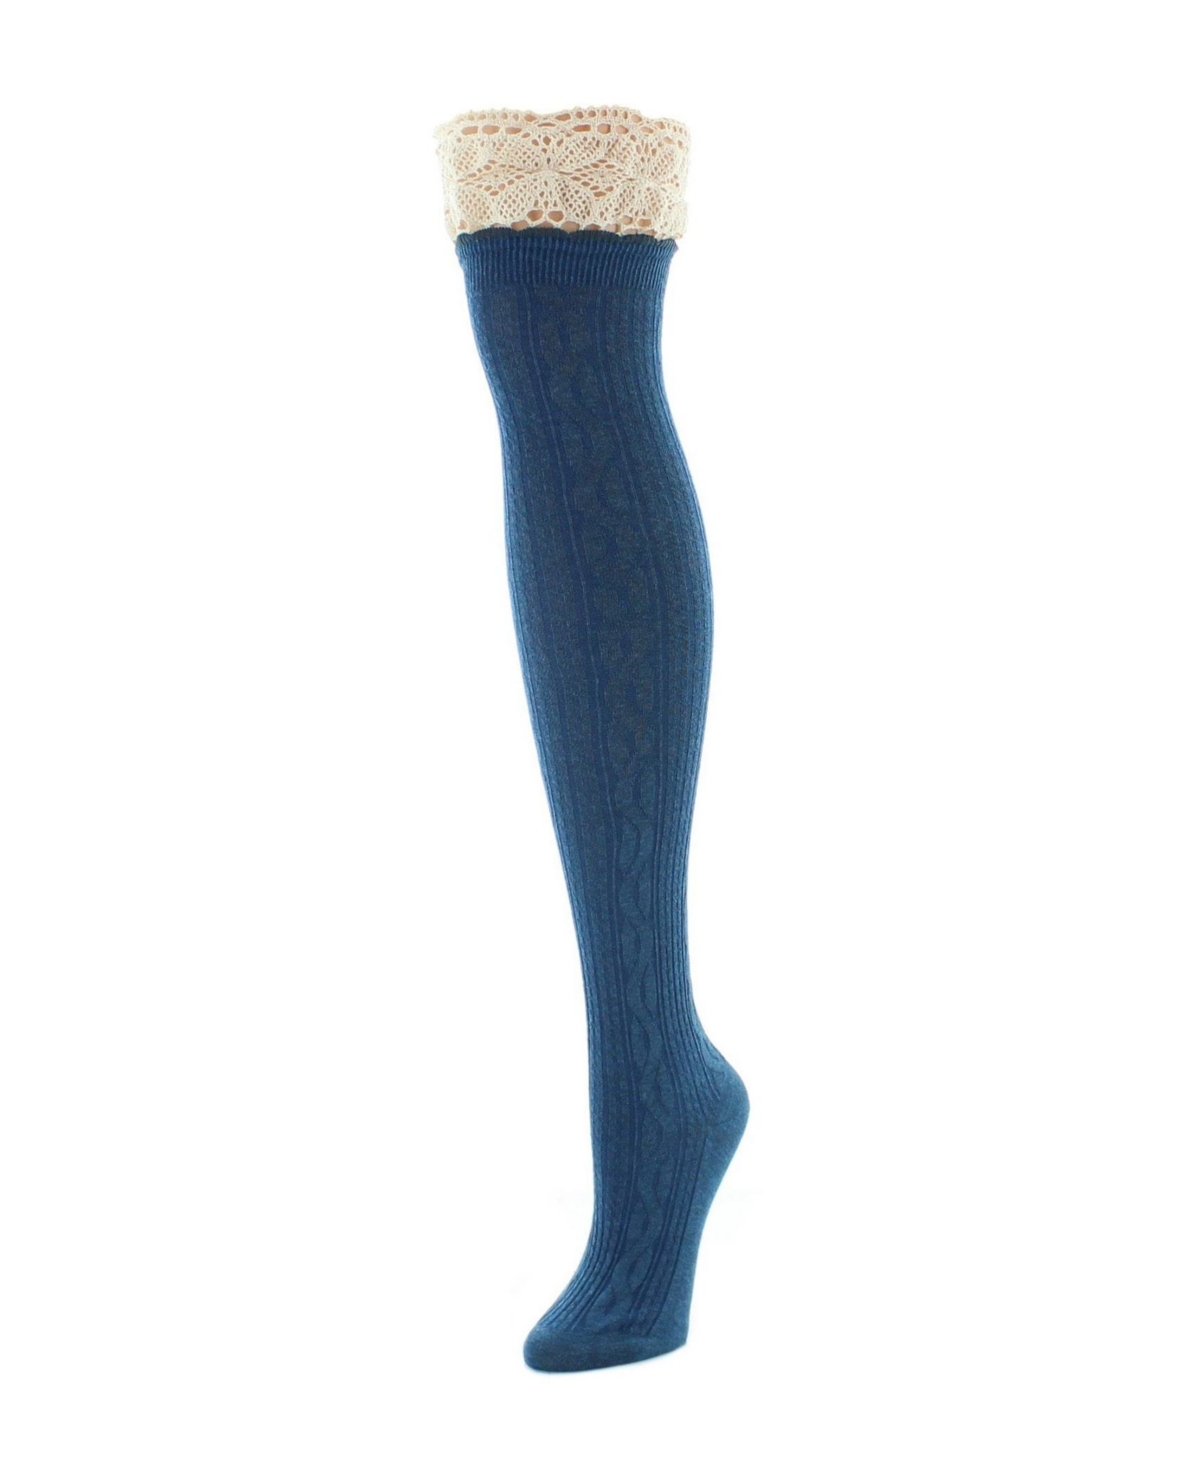 Women's Lace Top Cable Knee High Socks - Legion Blue Heather